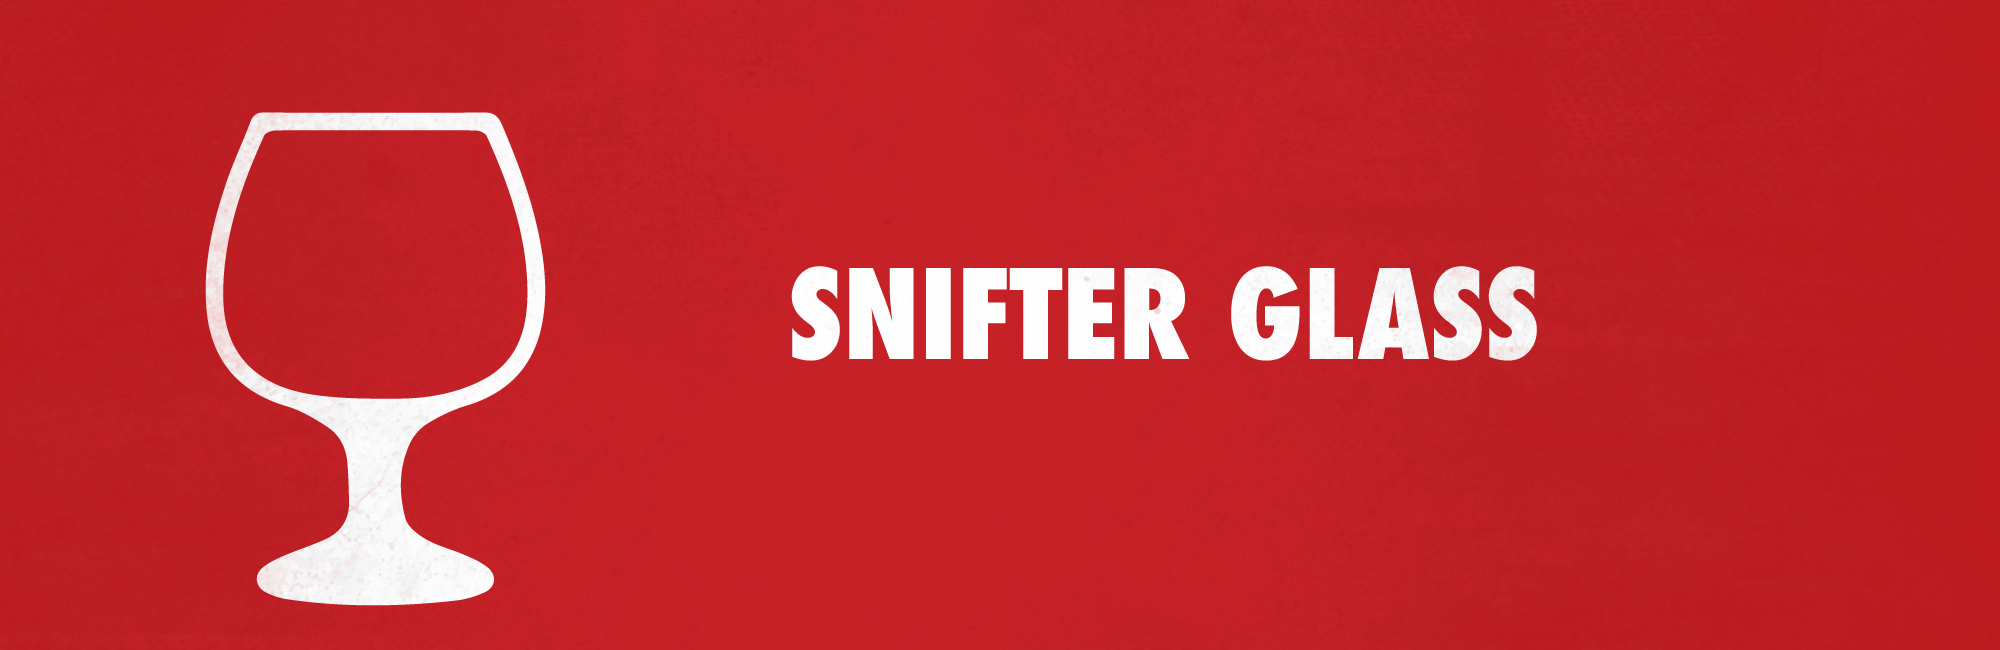 snifters